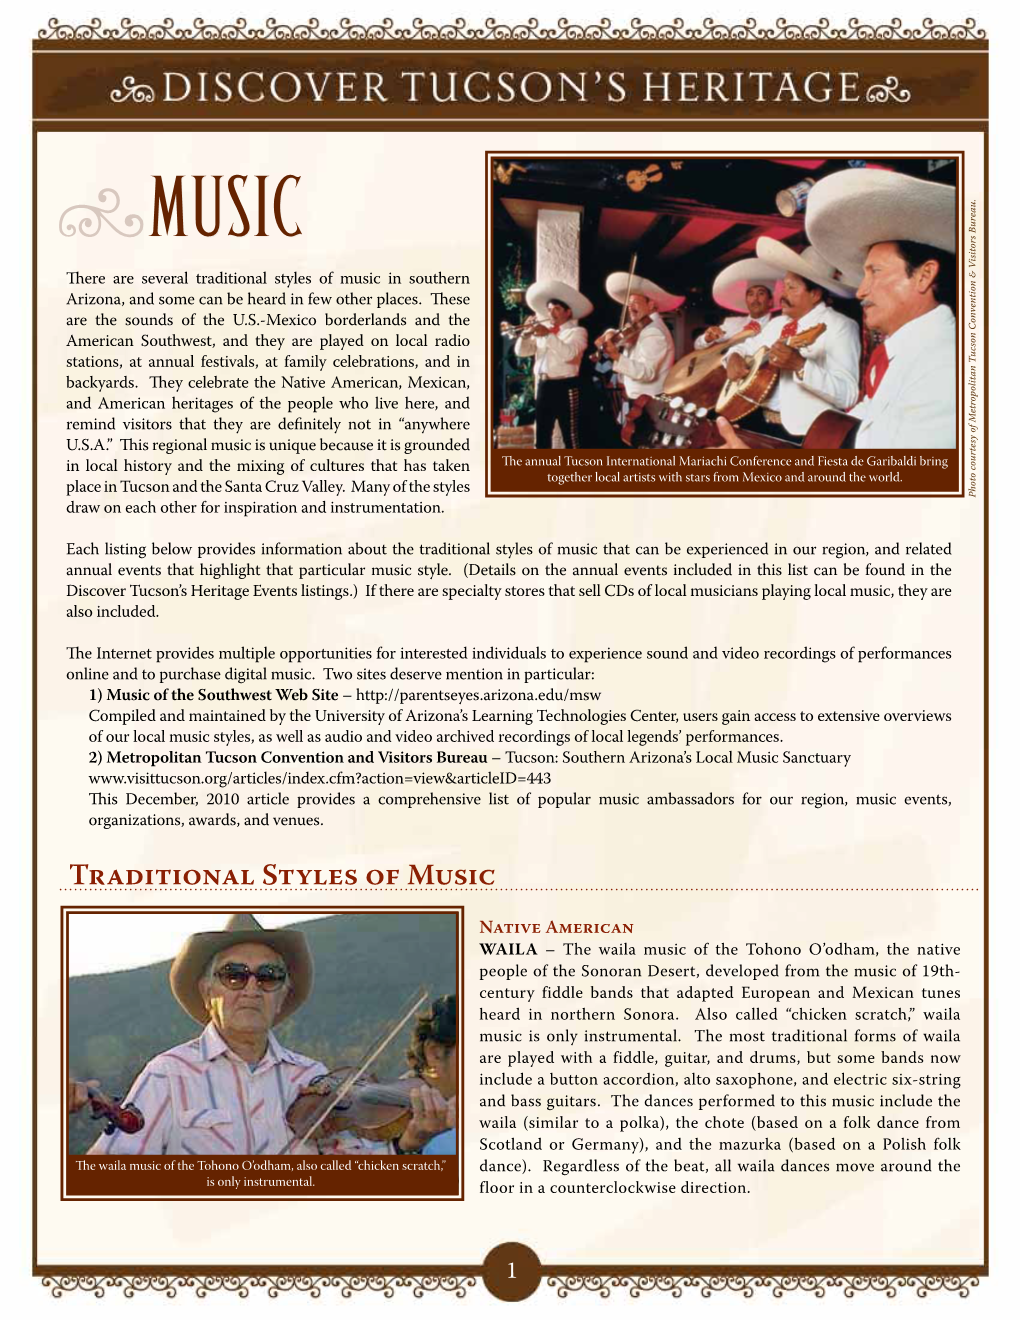 Traditional Styles of Music in Southern Arizona, and Some Can Be Heard in Few Other Places